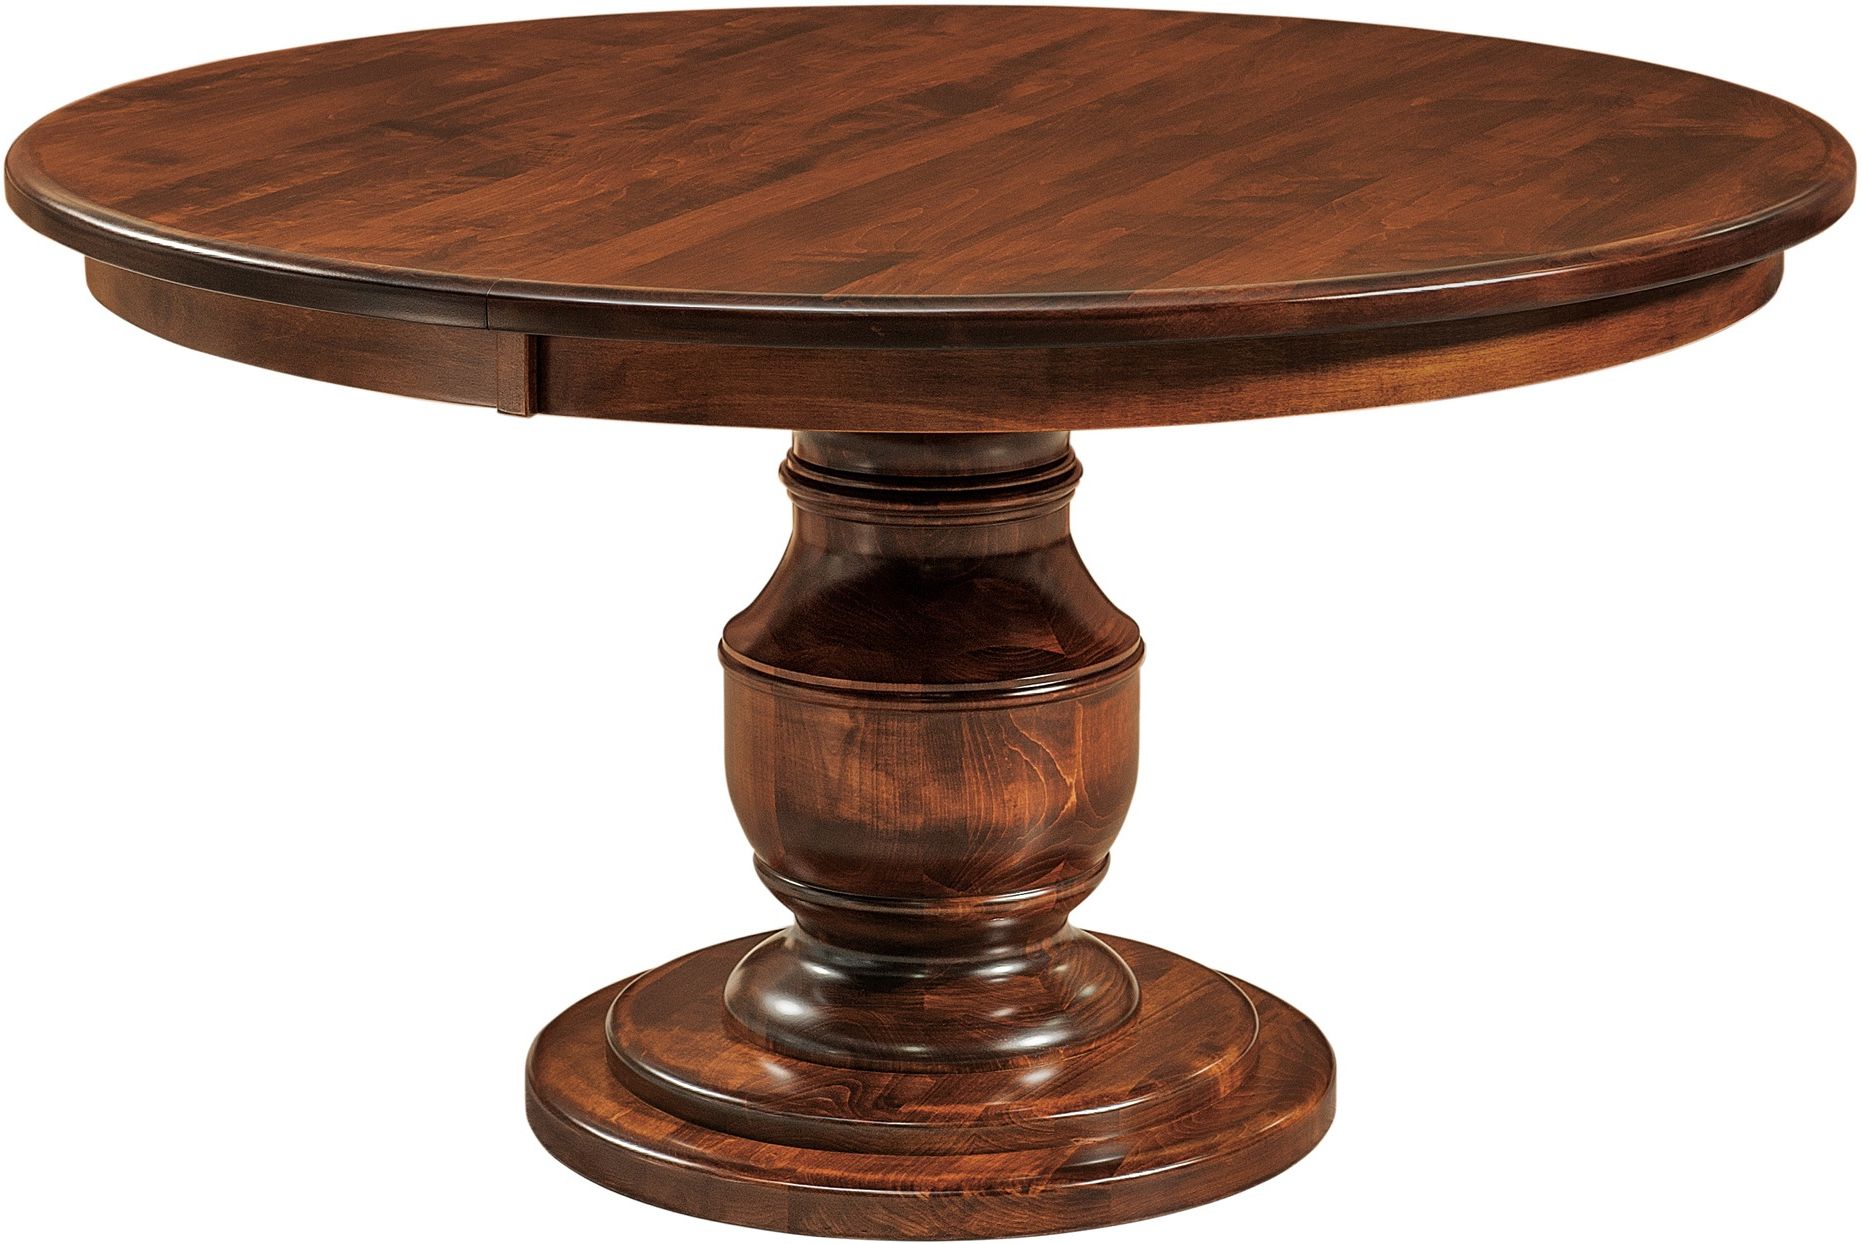 2019 Round Pedestal Dining Tables With One Leaf Intended For Pedestal Tables (View 12 of 15)